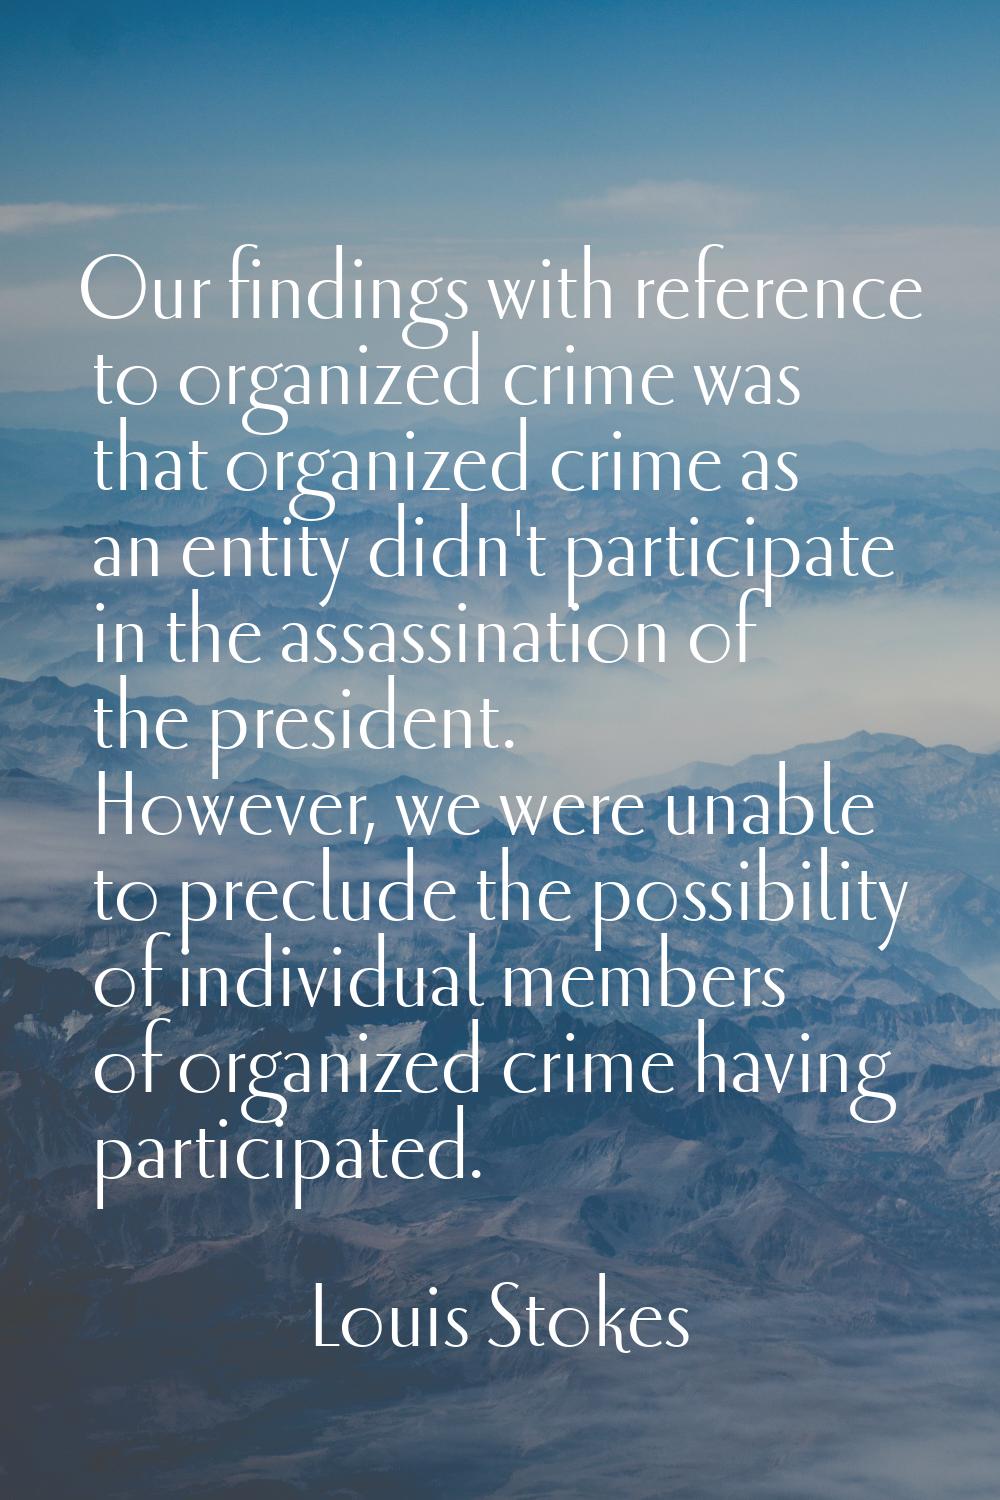 Our findings with reference to organized crime was that organized crime as an entity didn't partici